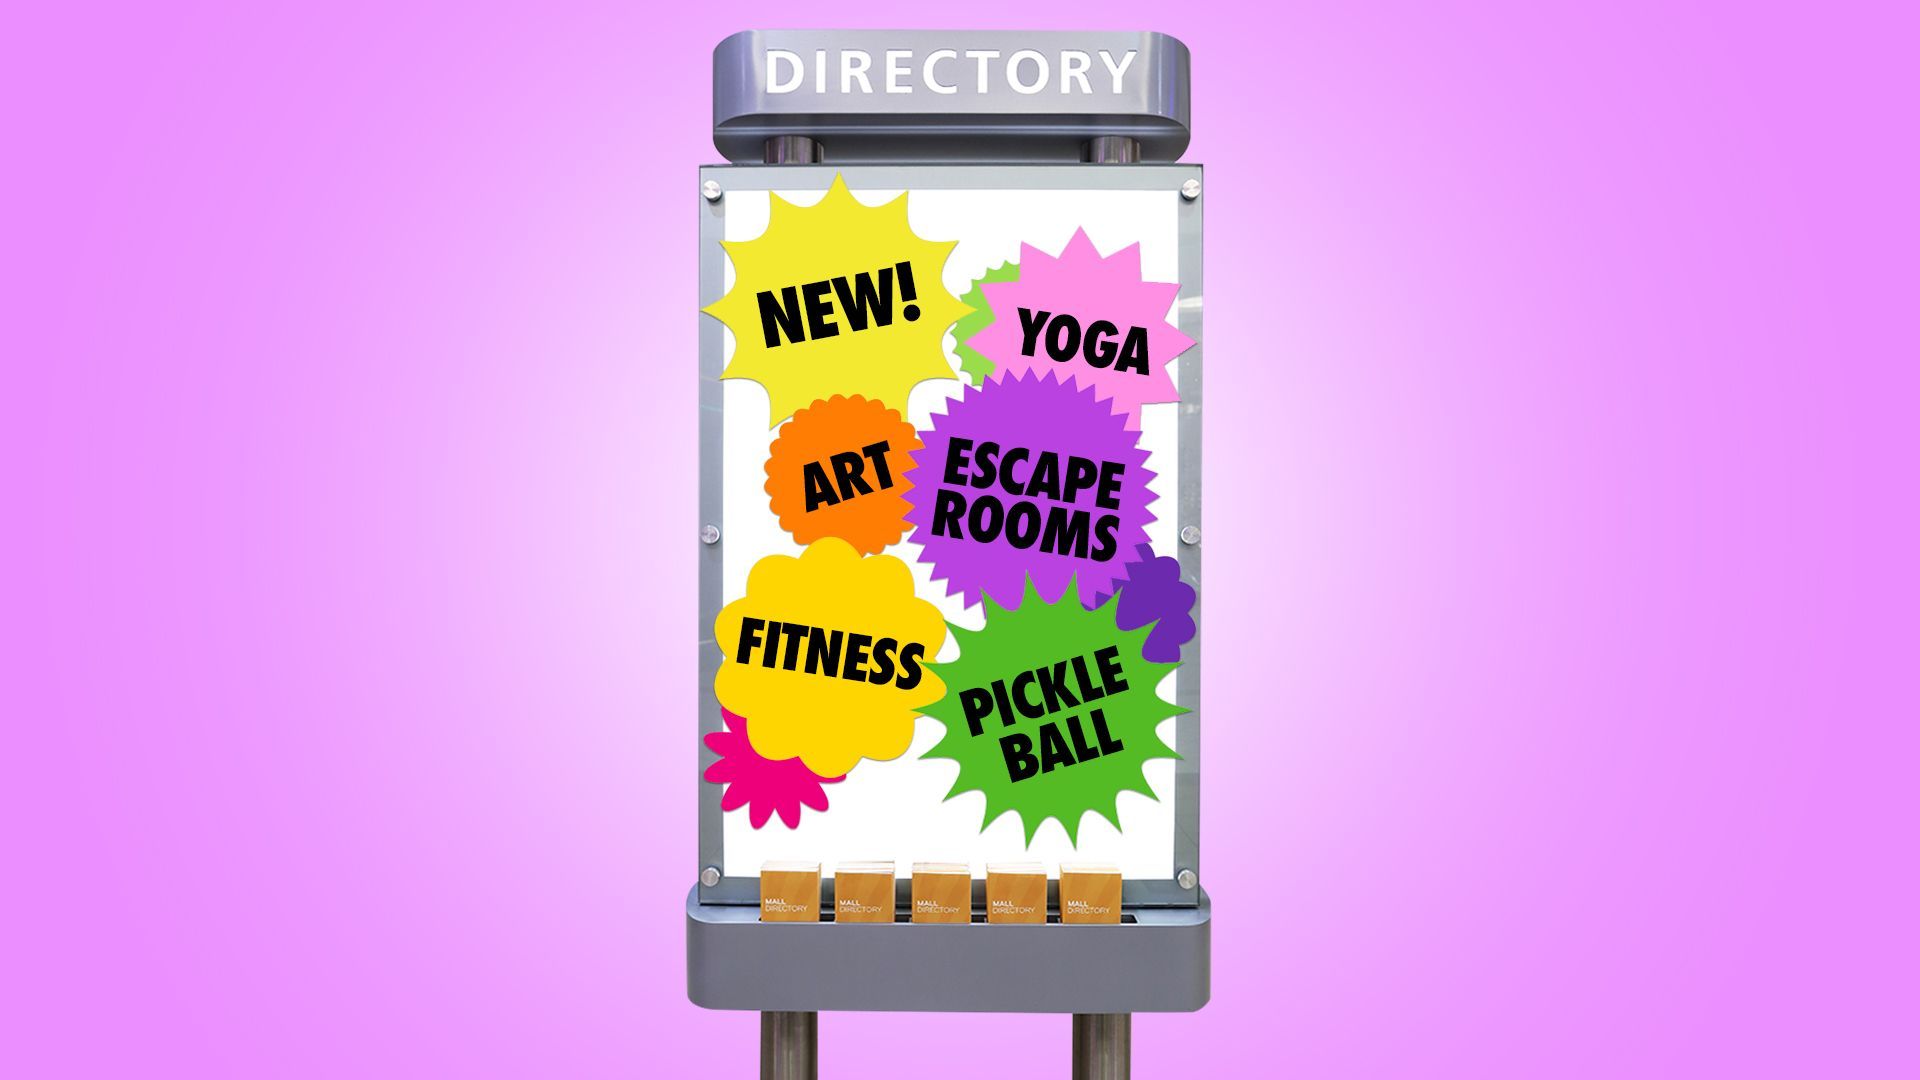 Illustration of a mall directory with new stickers all over it describing attractions